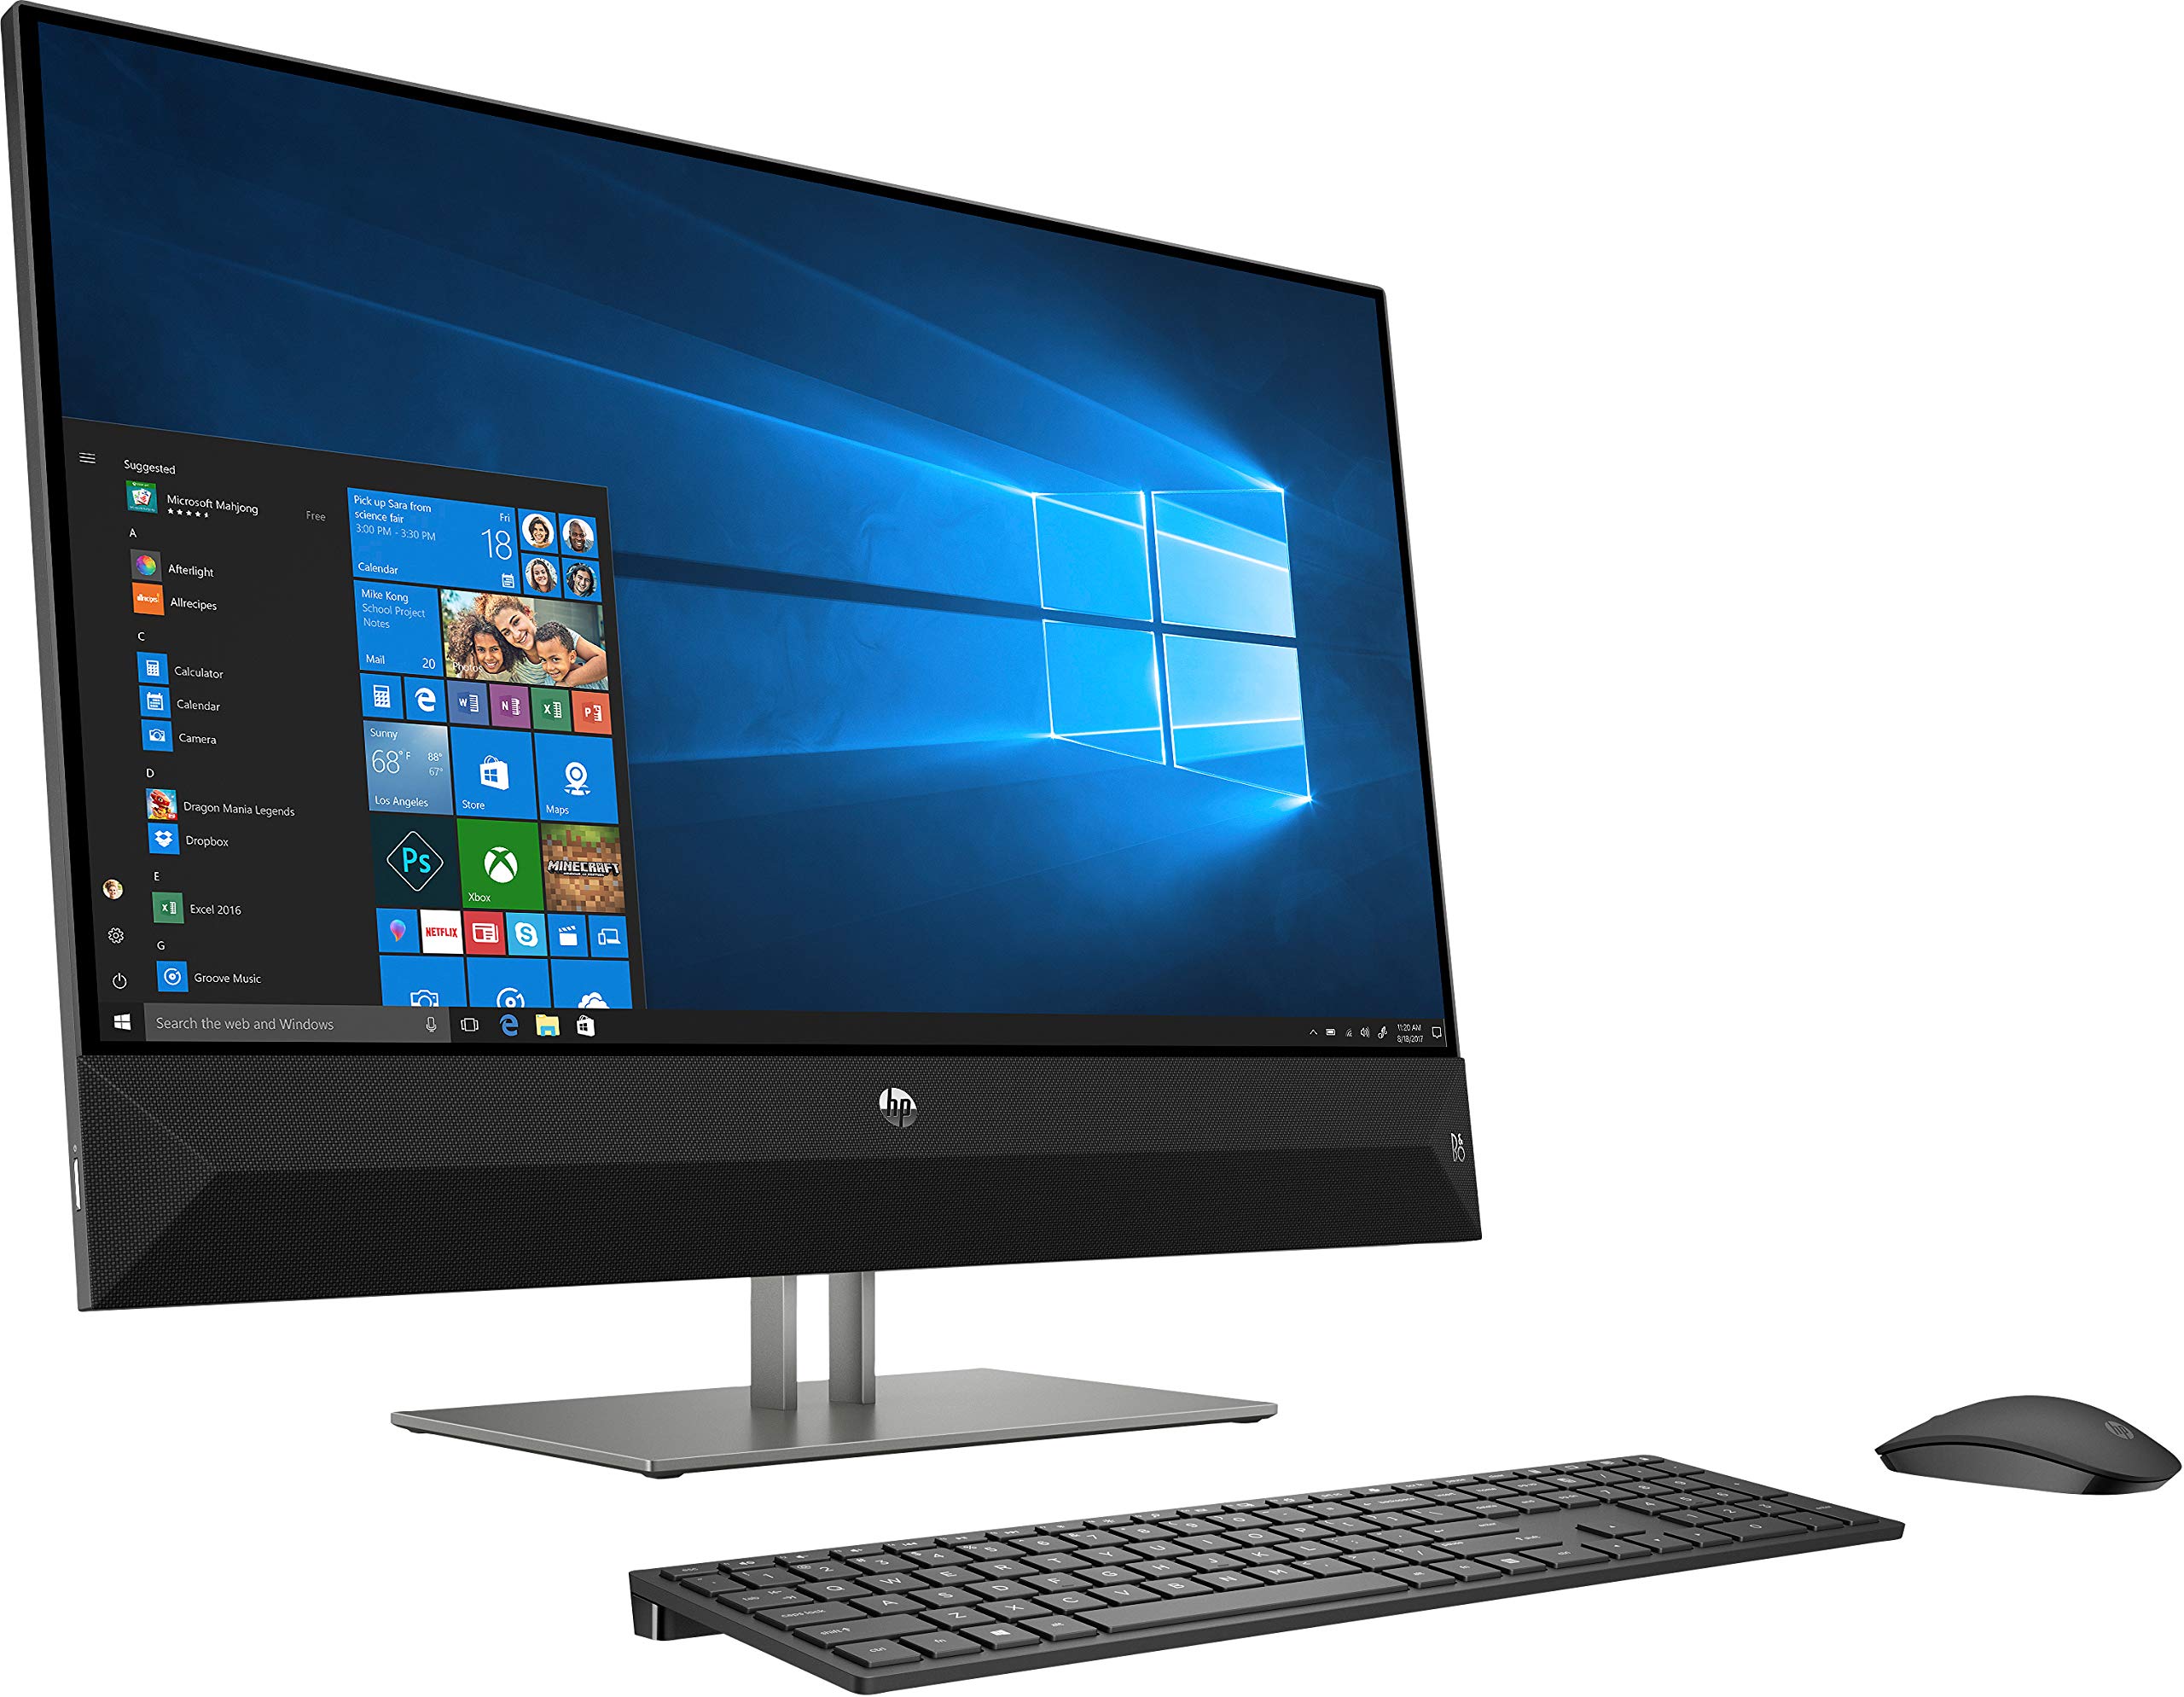 HP Pavilion 27" All-in-One Touchscreen Desktop Computer AMD Ryzen 5 8GB RAM 1TB HDD Sparkling Black - AMD Ryzen 5-2600H Quad-core Wireless Keyboard & Mouse Included - in-Plane Switching